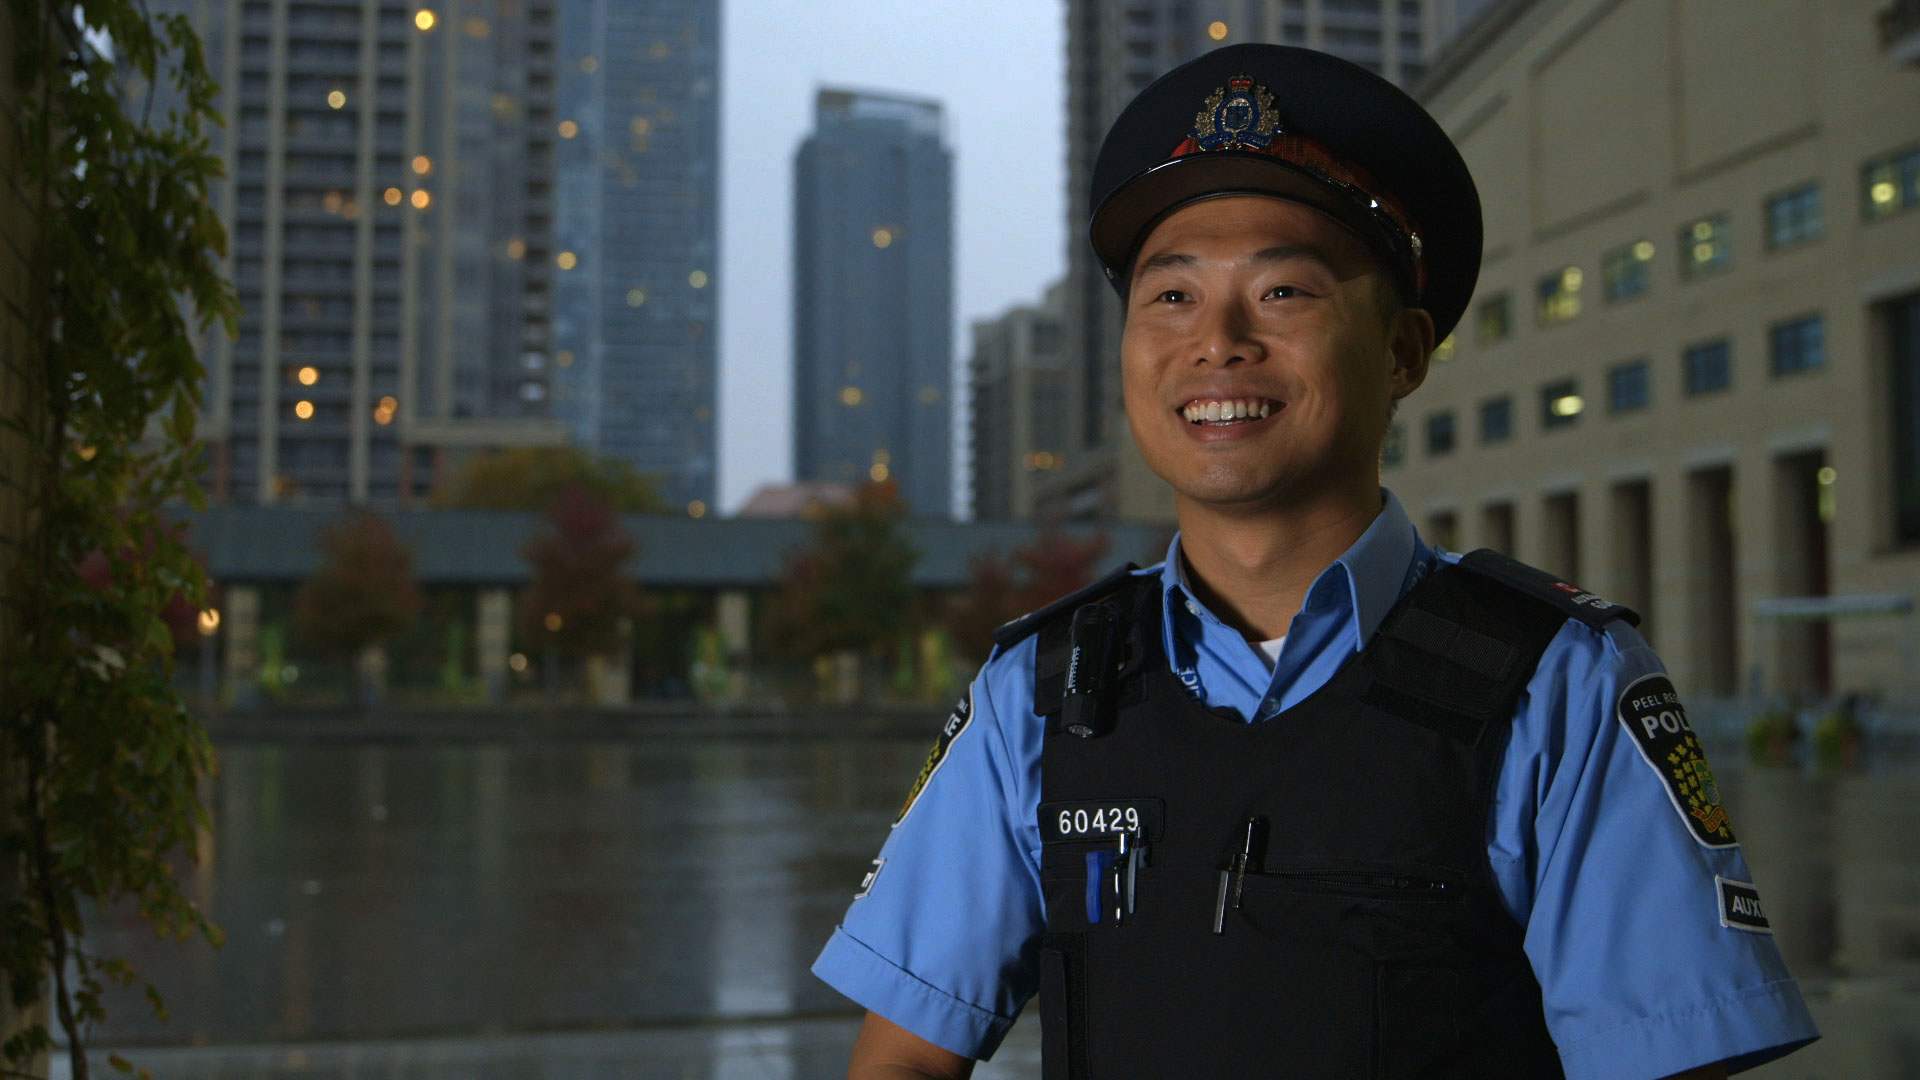 A man in a police uniform, smiling, backgrounded by a city street.